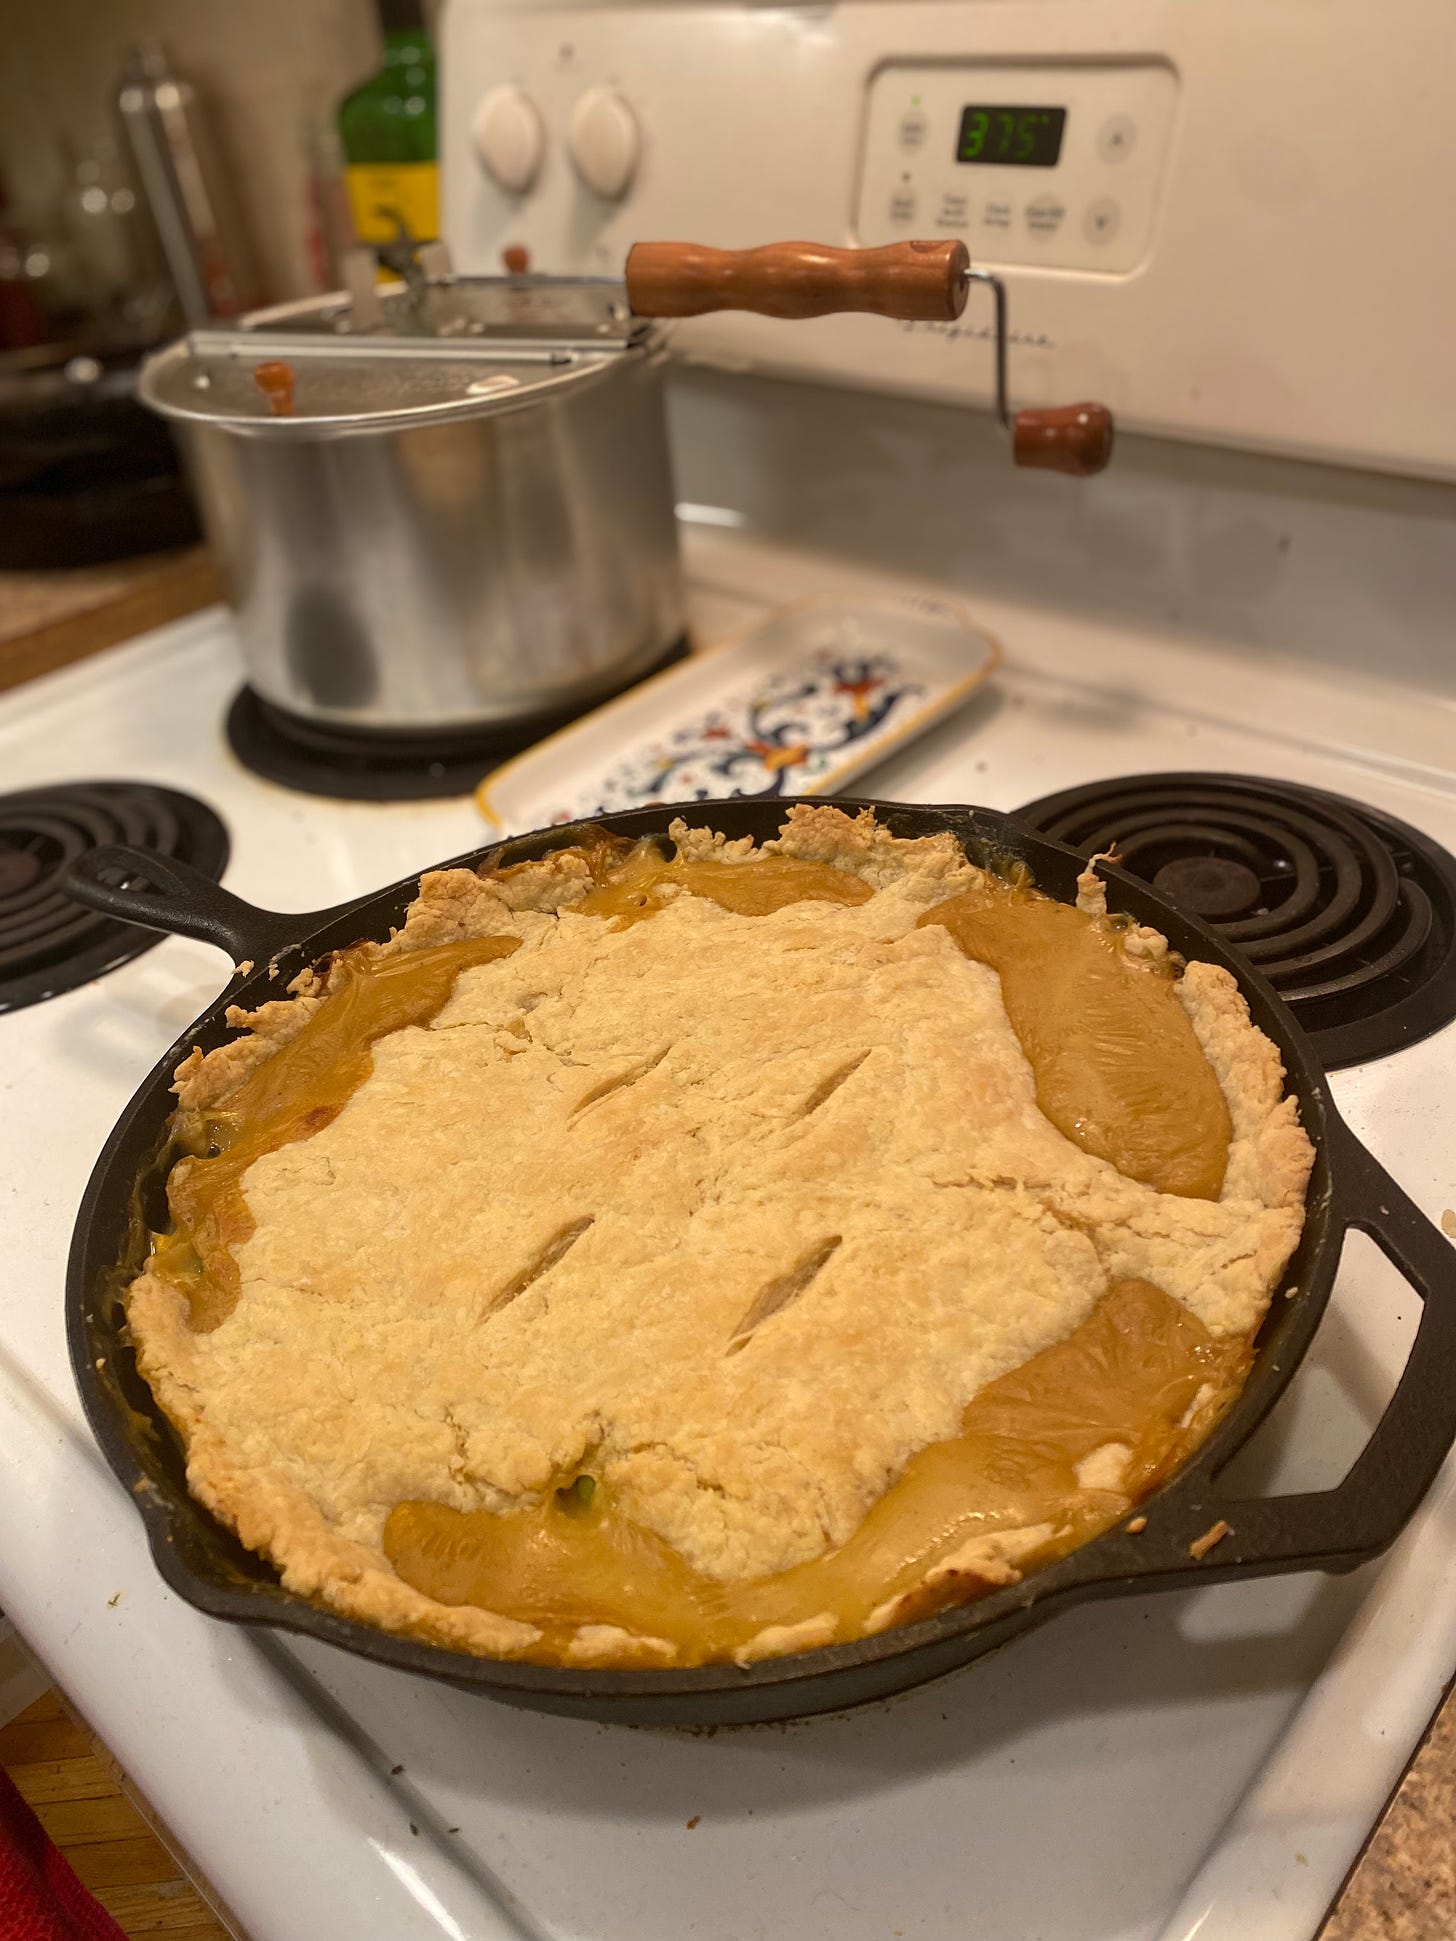 On the stovetop, a large cast-iron pan of the pot pie described above, the crust with a few scores in the centre and broken in a few places near the edges. Filling has also leaked up over the top.